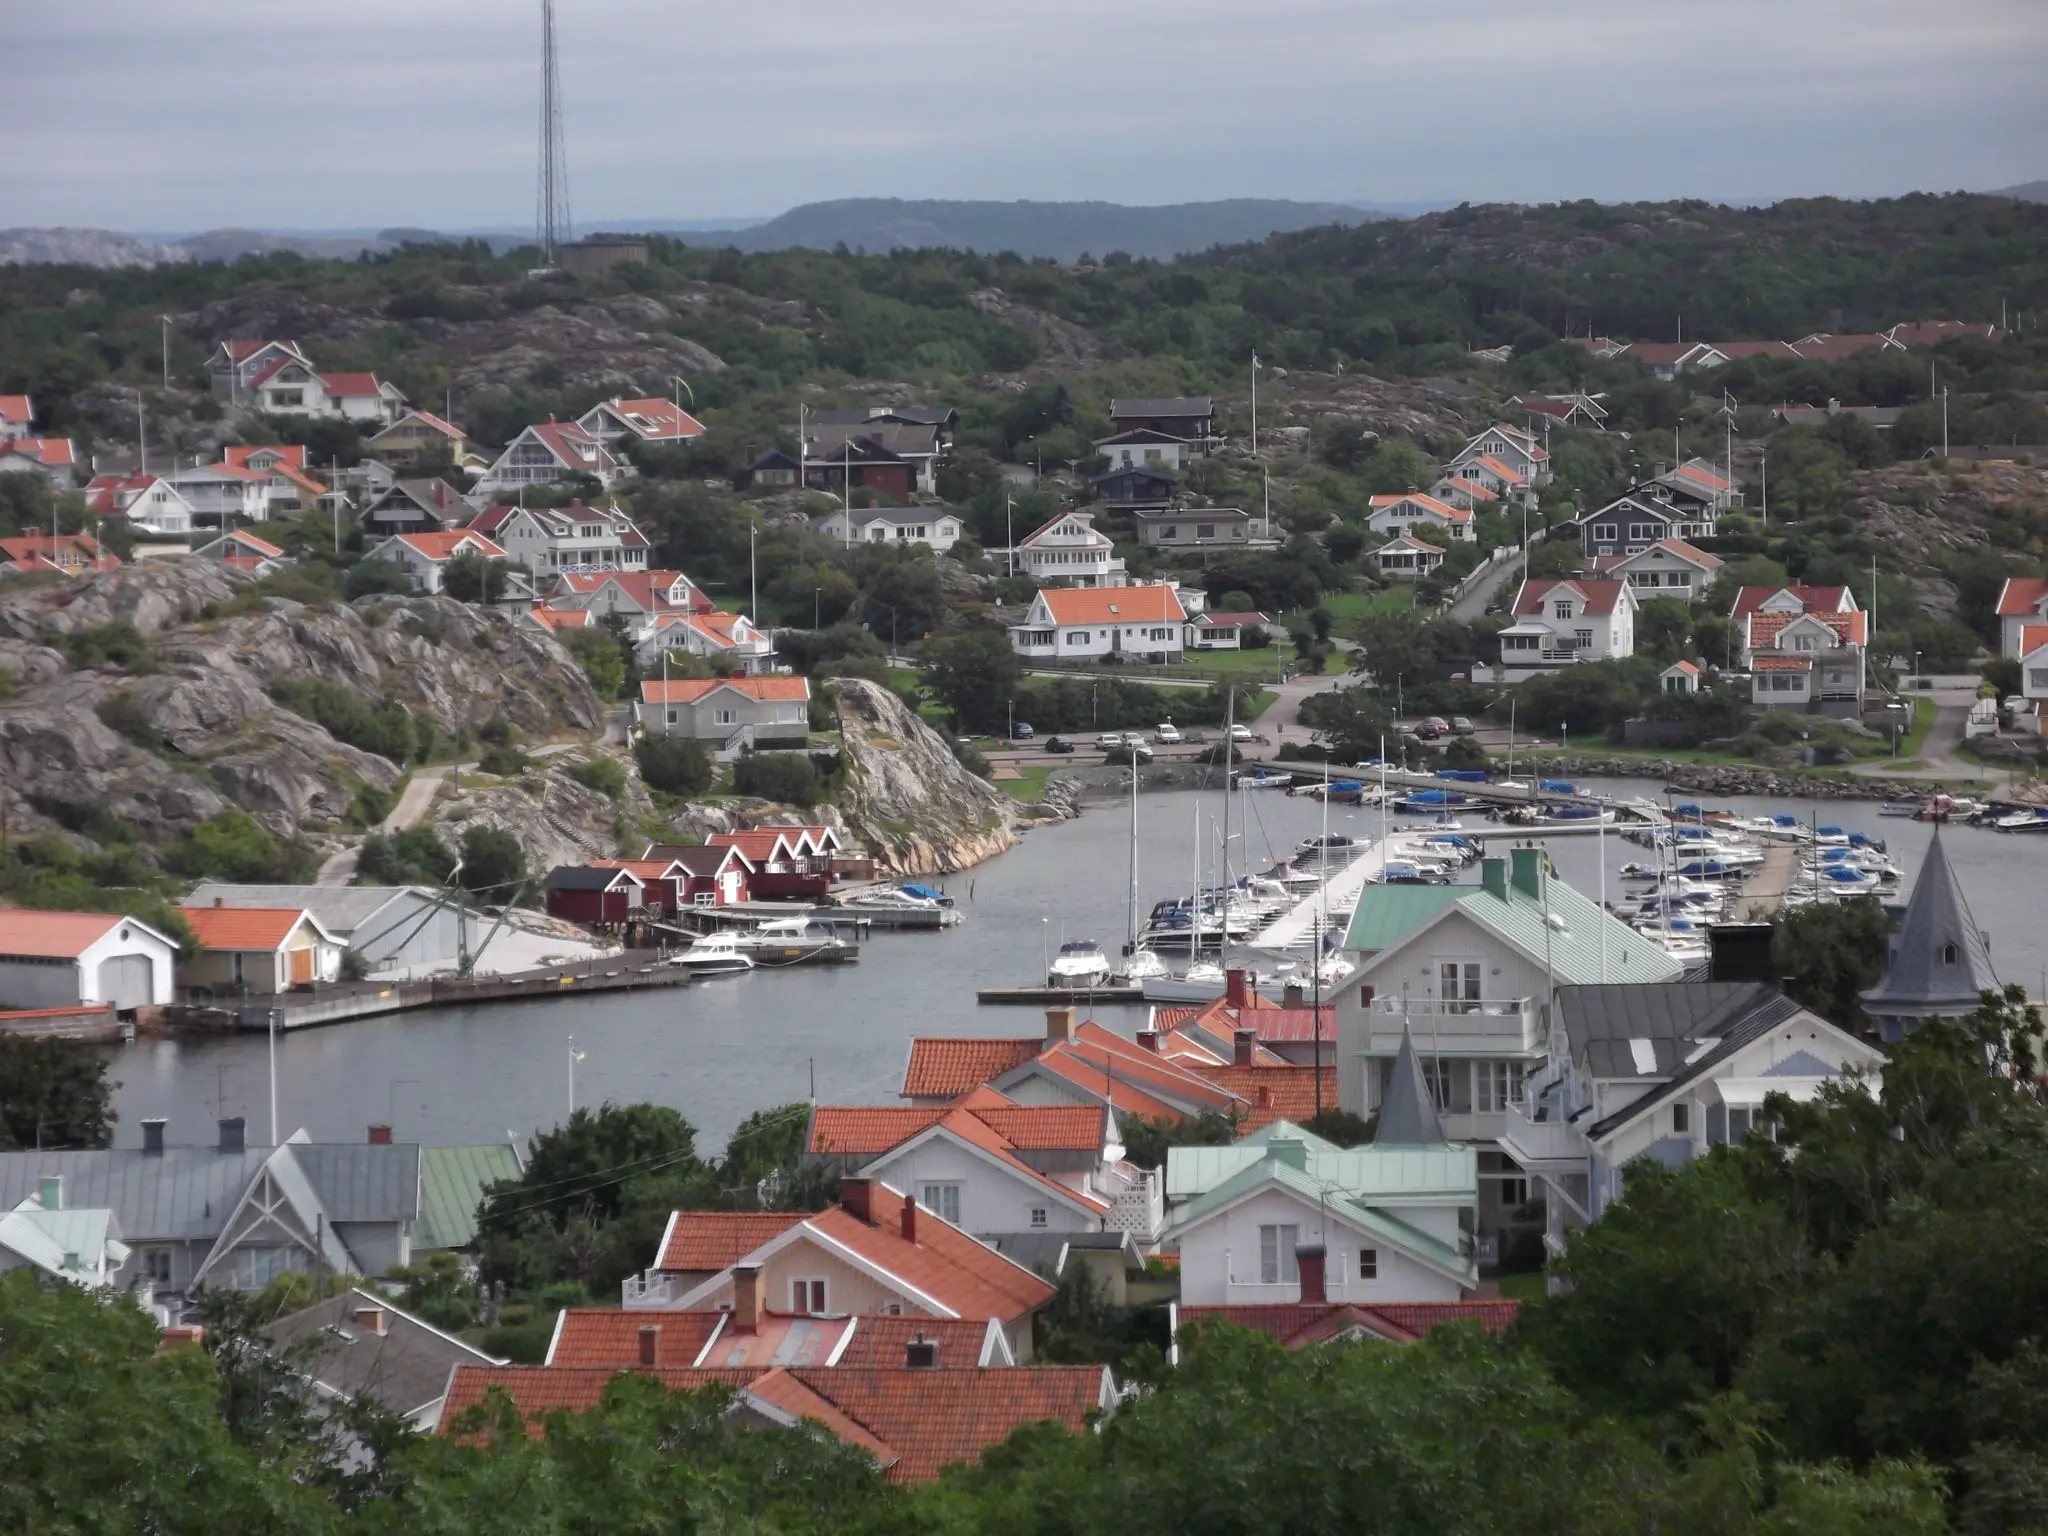 Marstrand: A day out in Sweden’s countryside